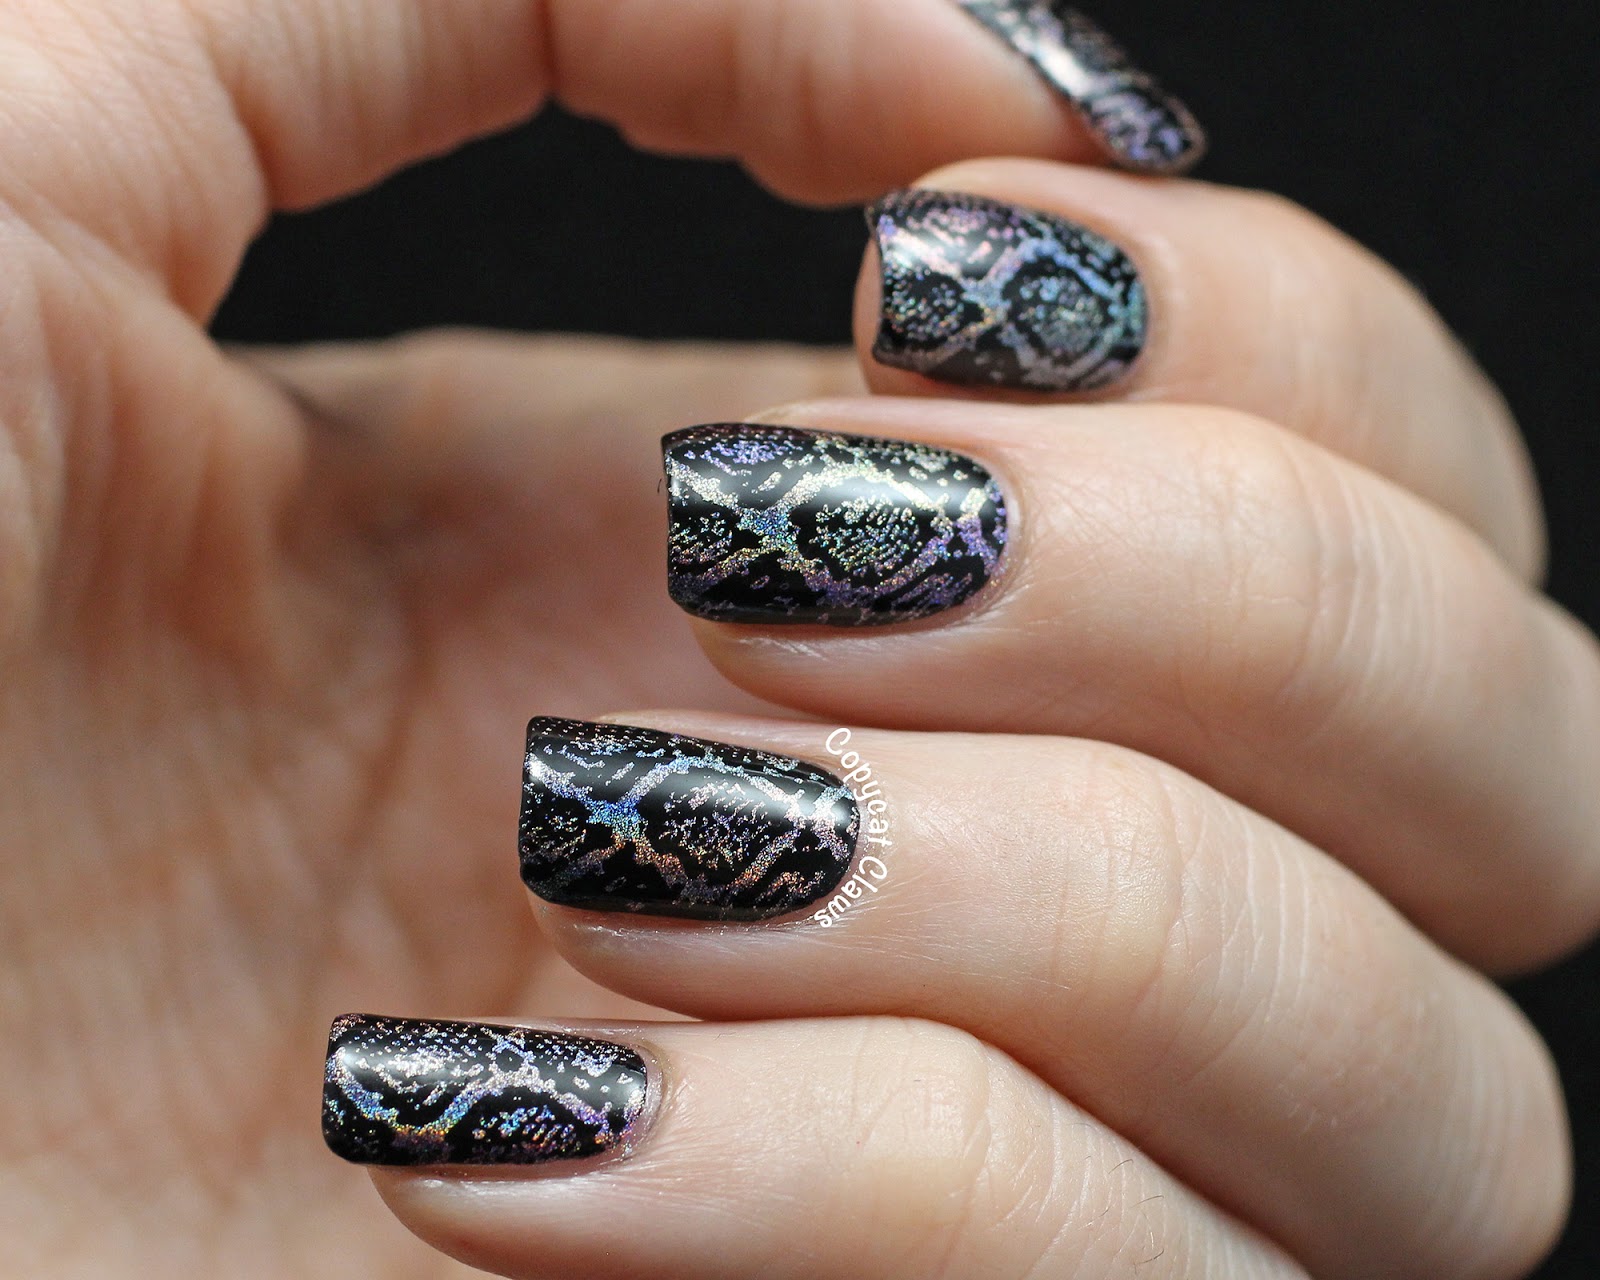 9. Snakeskin Nail Art Tutorial with Foil - wide 3